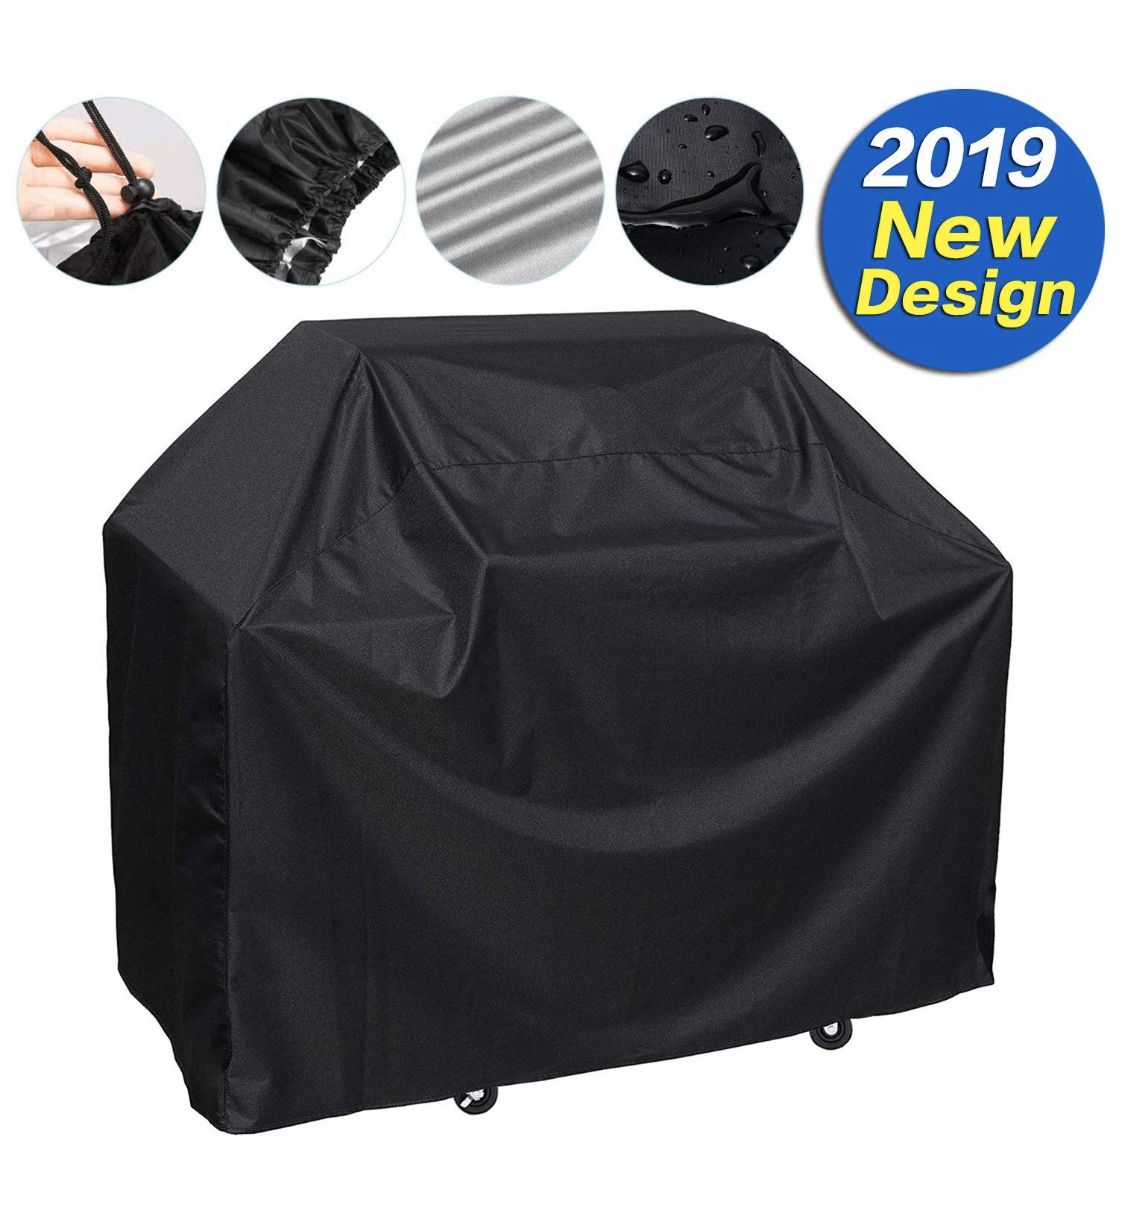 10–02. Grill Cover,(58” Black) BBQ Special Grill Cover,Waterproof and UV Resistant Material, Durable and Convenient,Fits Grills of Weber Char-Broil